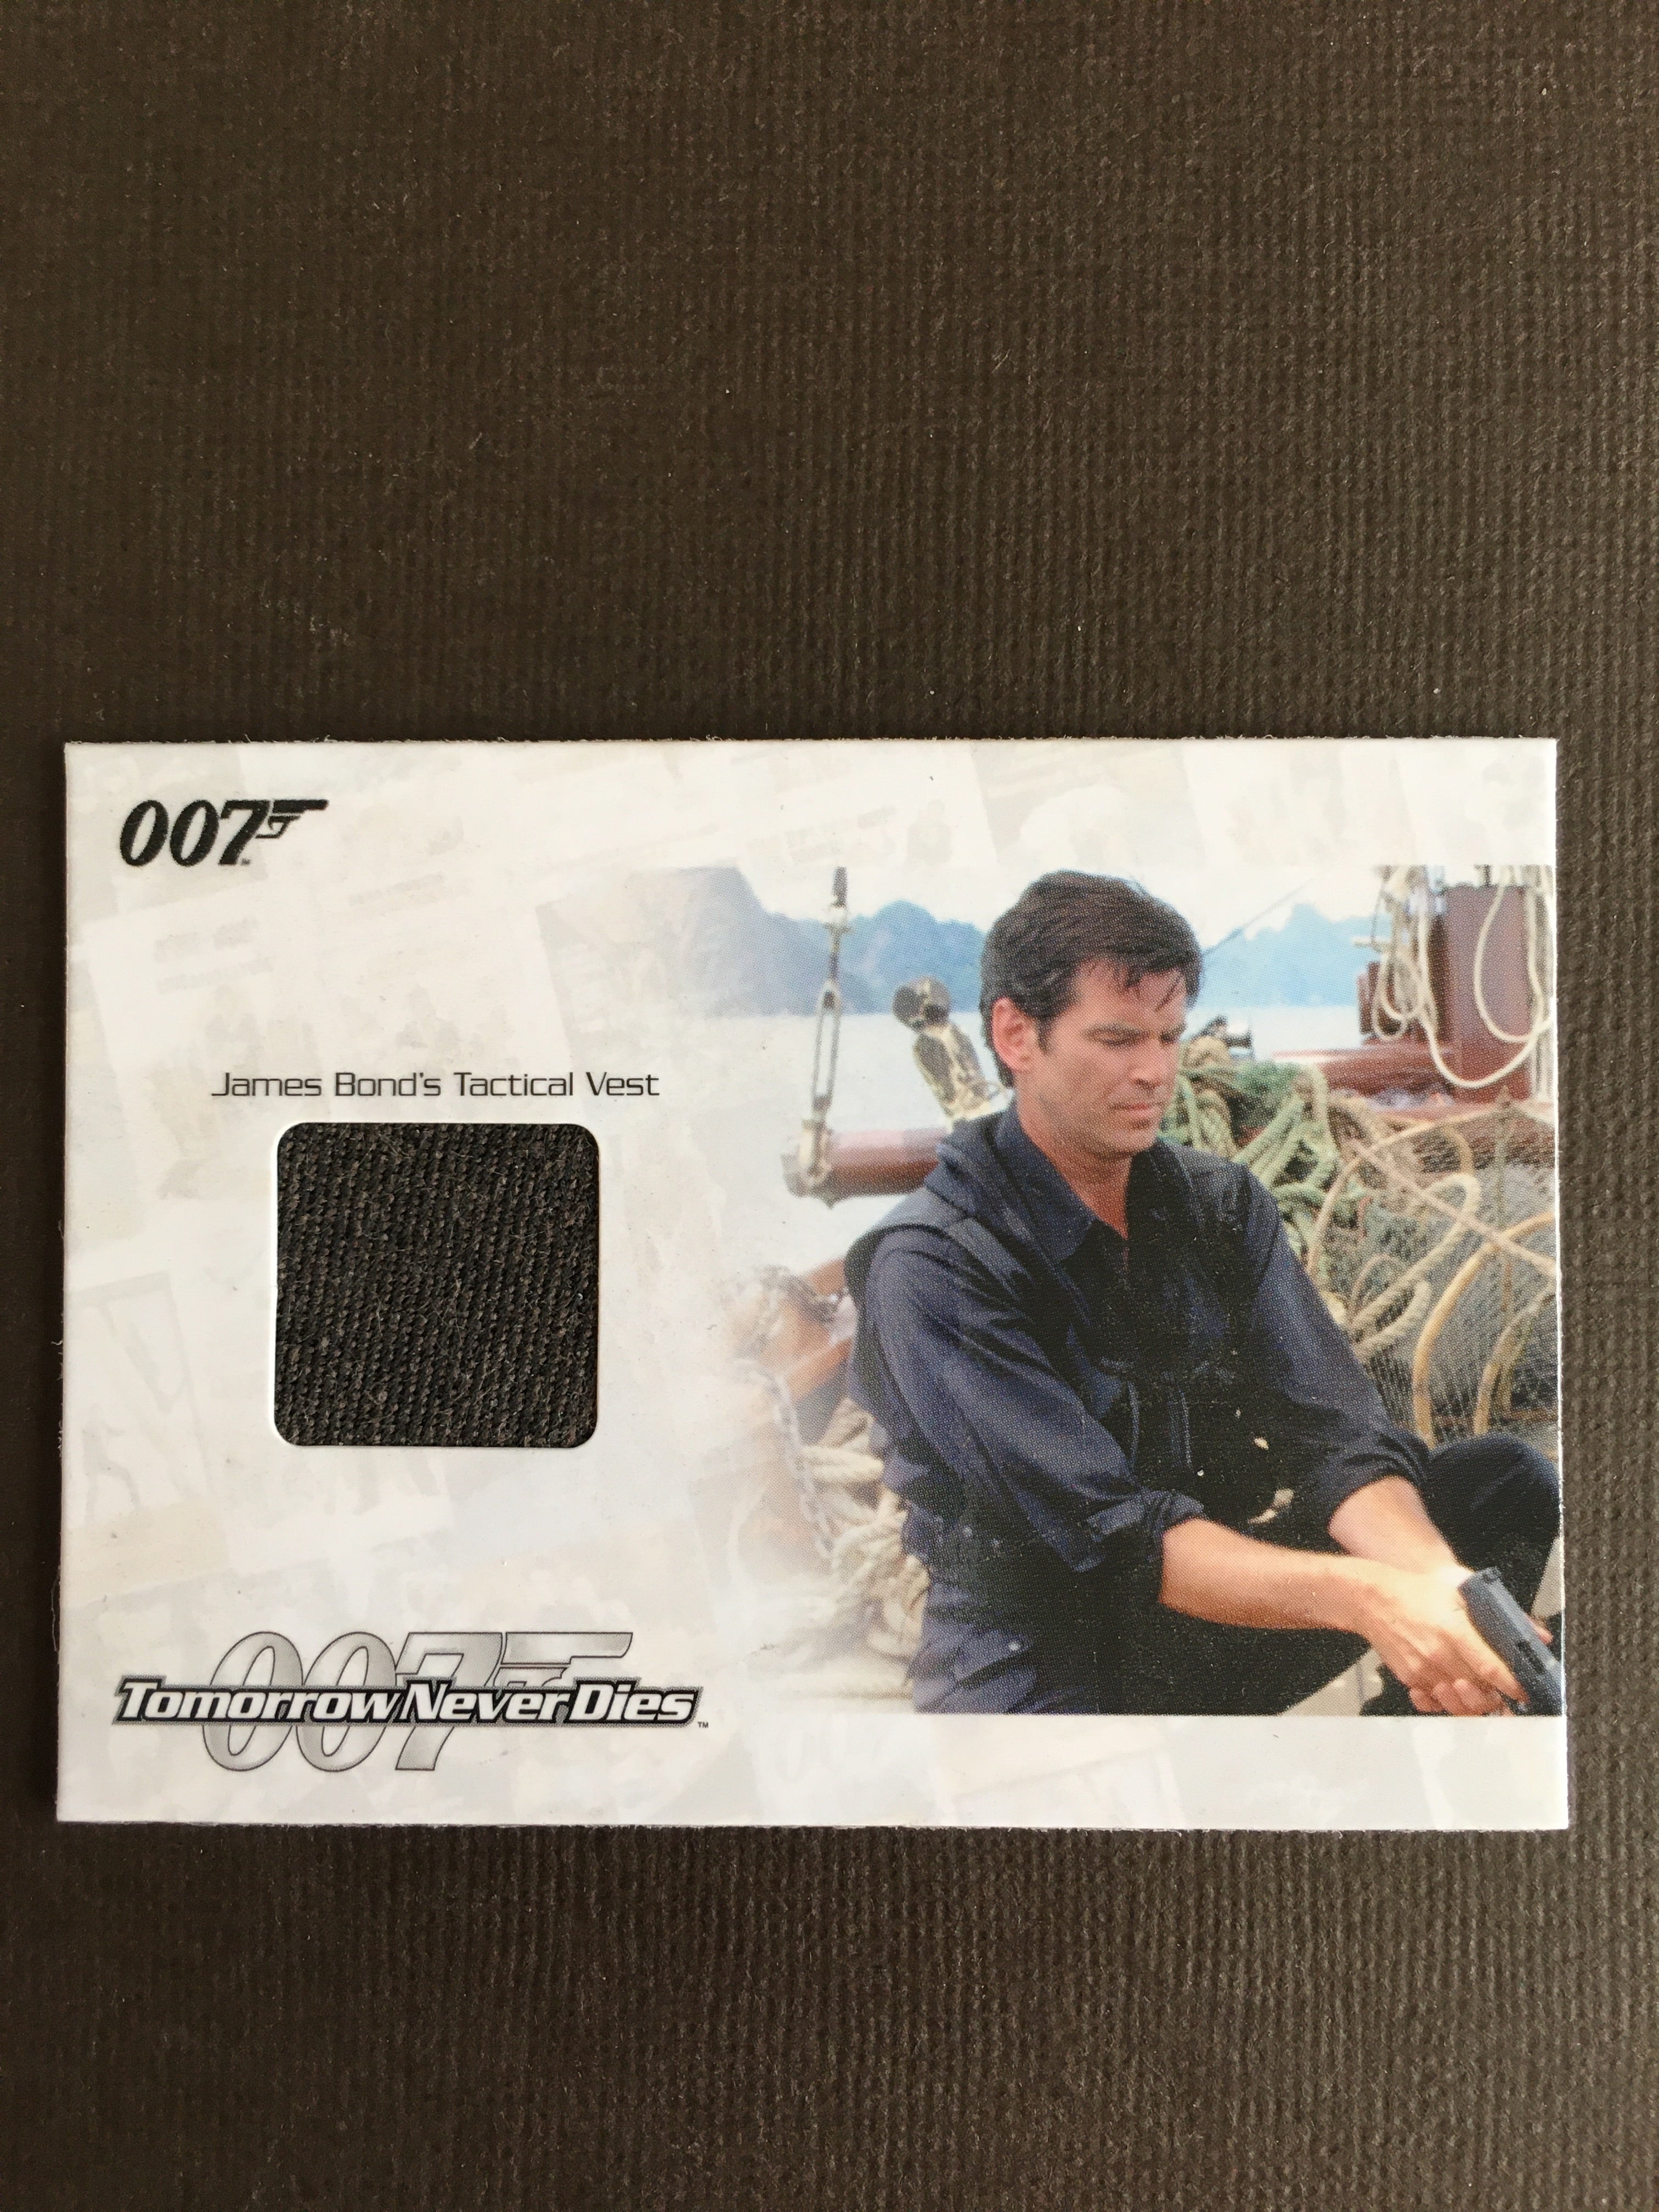 TOMMOROW NEVER DIES COSTUME (TACTICAL VEST) - Limited & Rare Trading Card